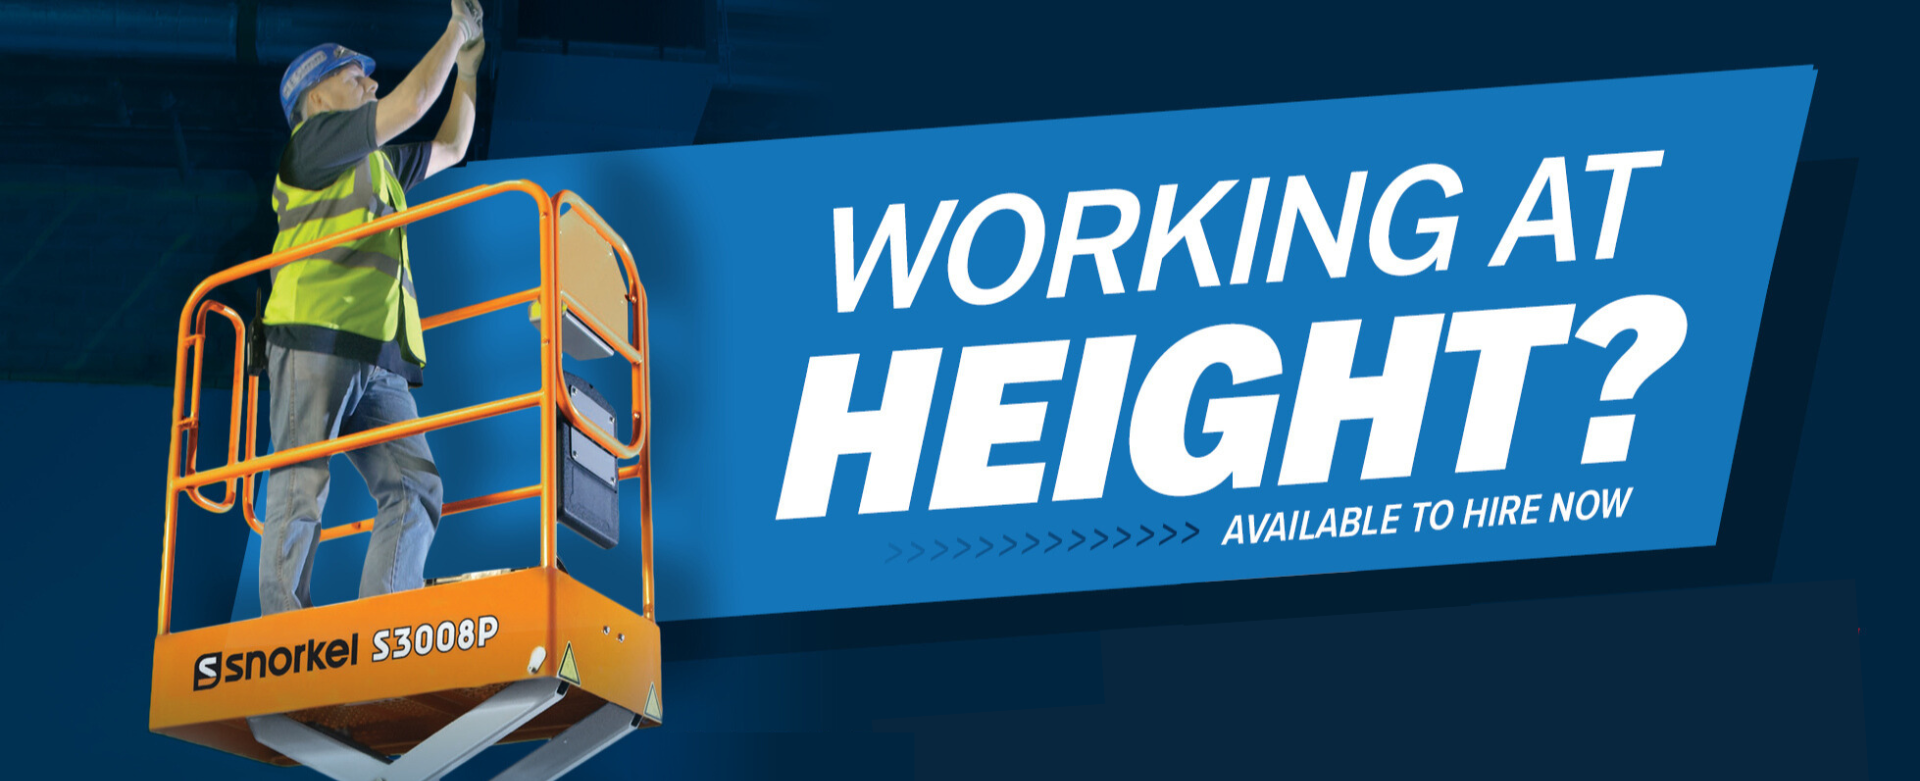 Working_at_Heights